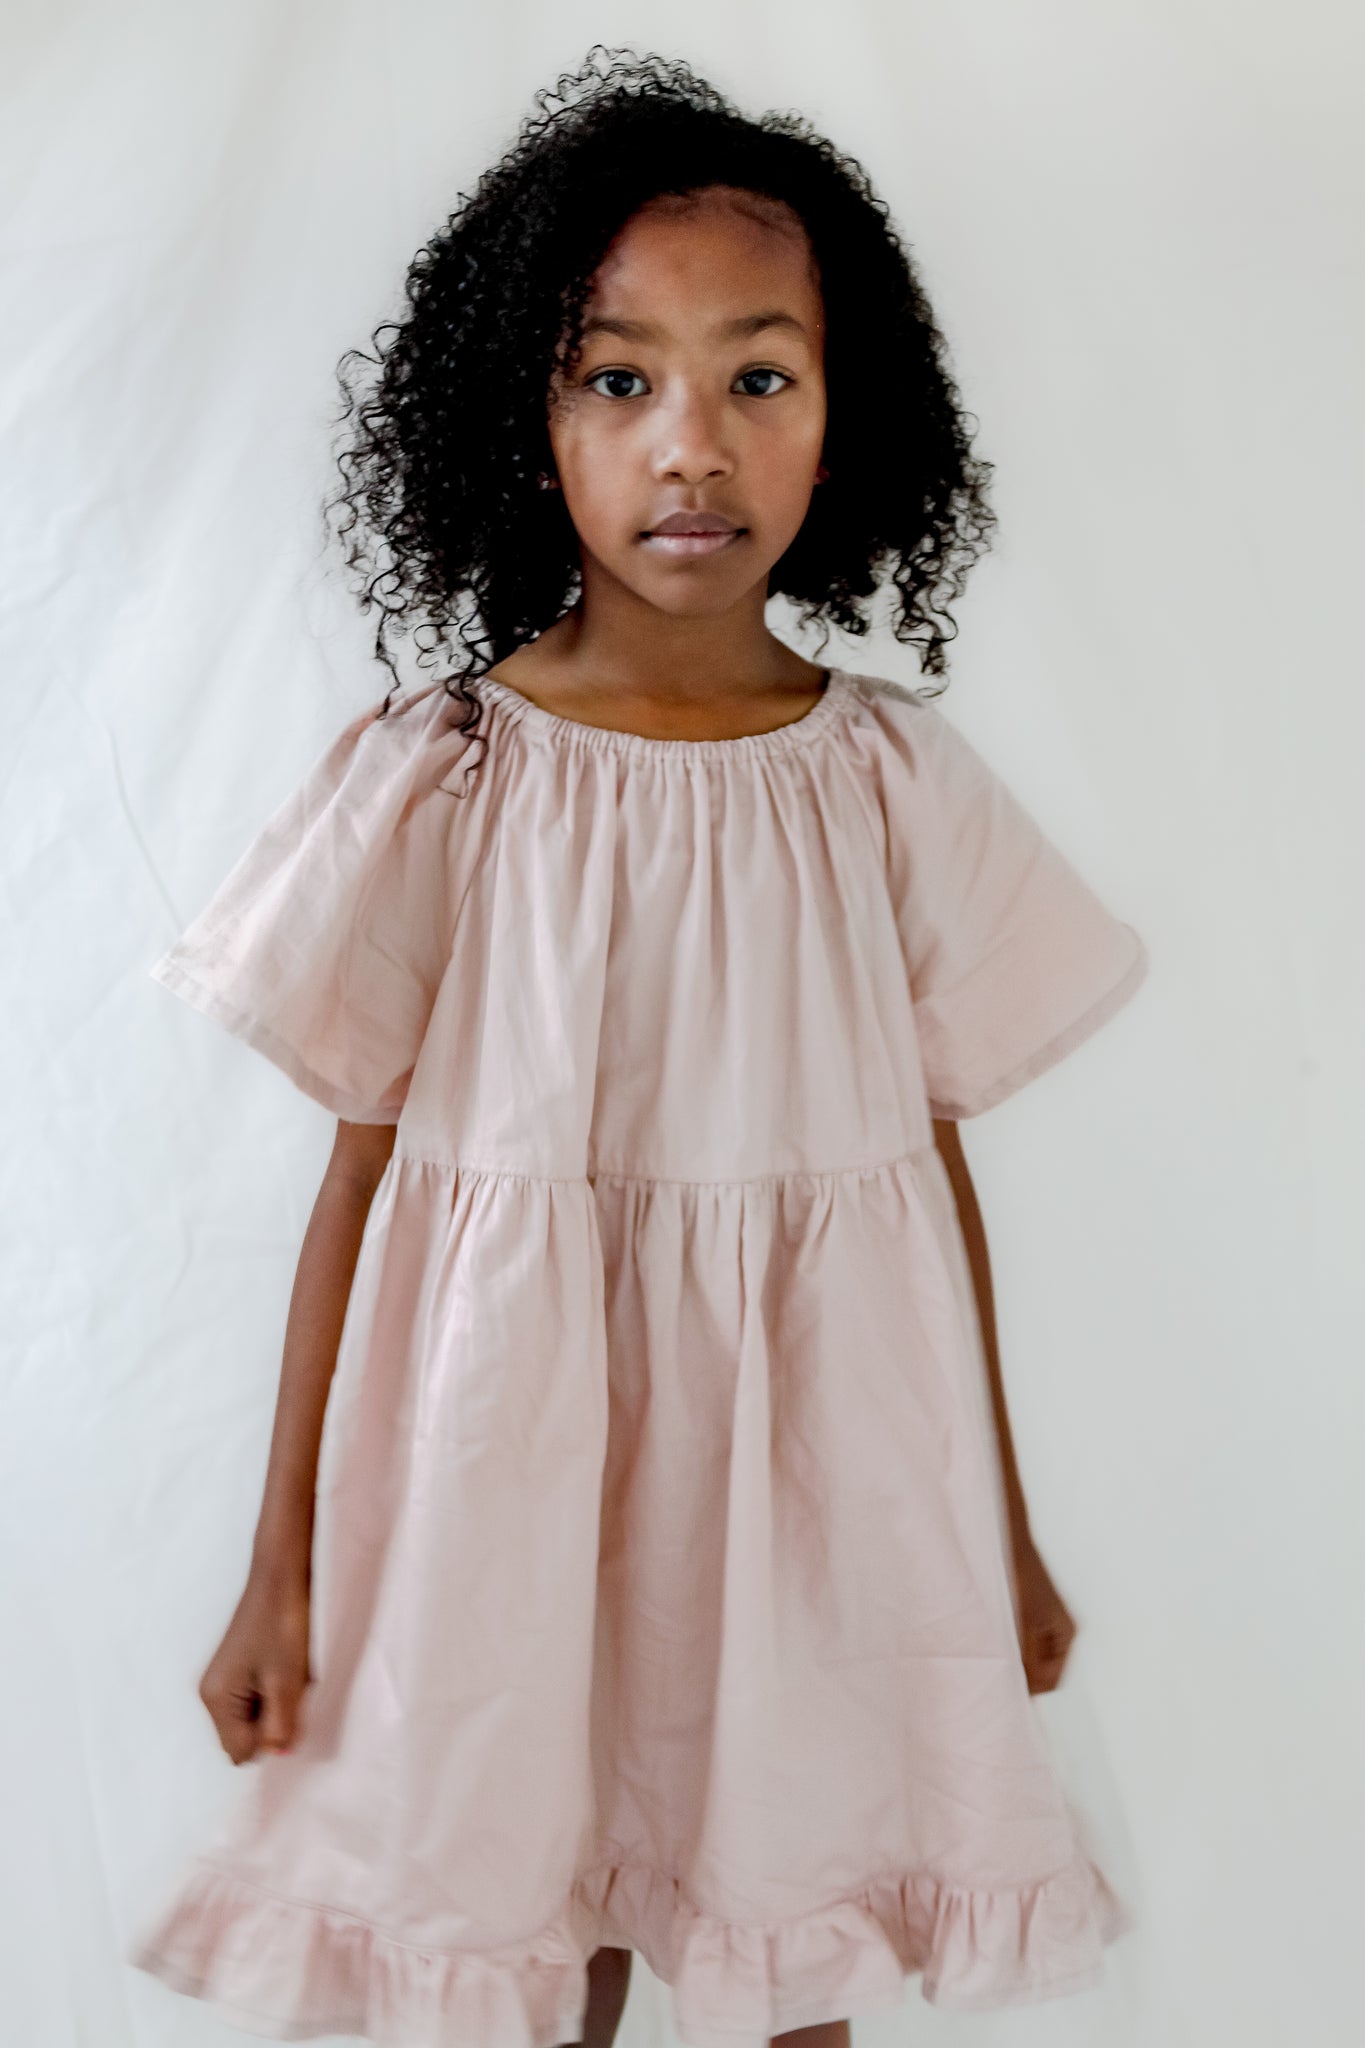 Girl wearing a Dusty Pink Dress With Bell Sleeves, Gathered Neckline, Ruffle Hem and Flowy Silhouette